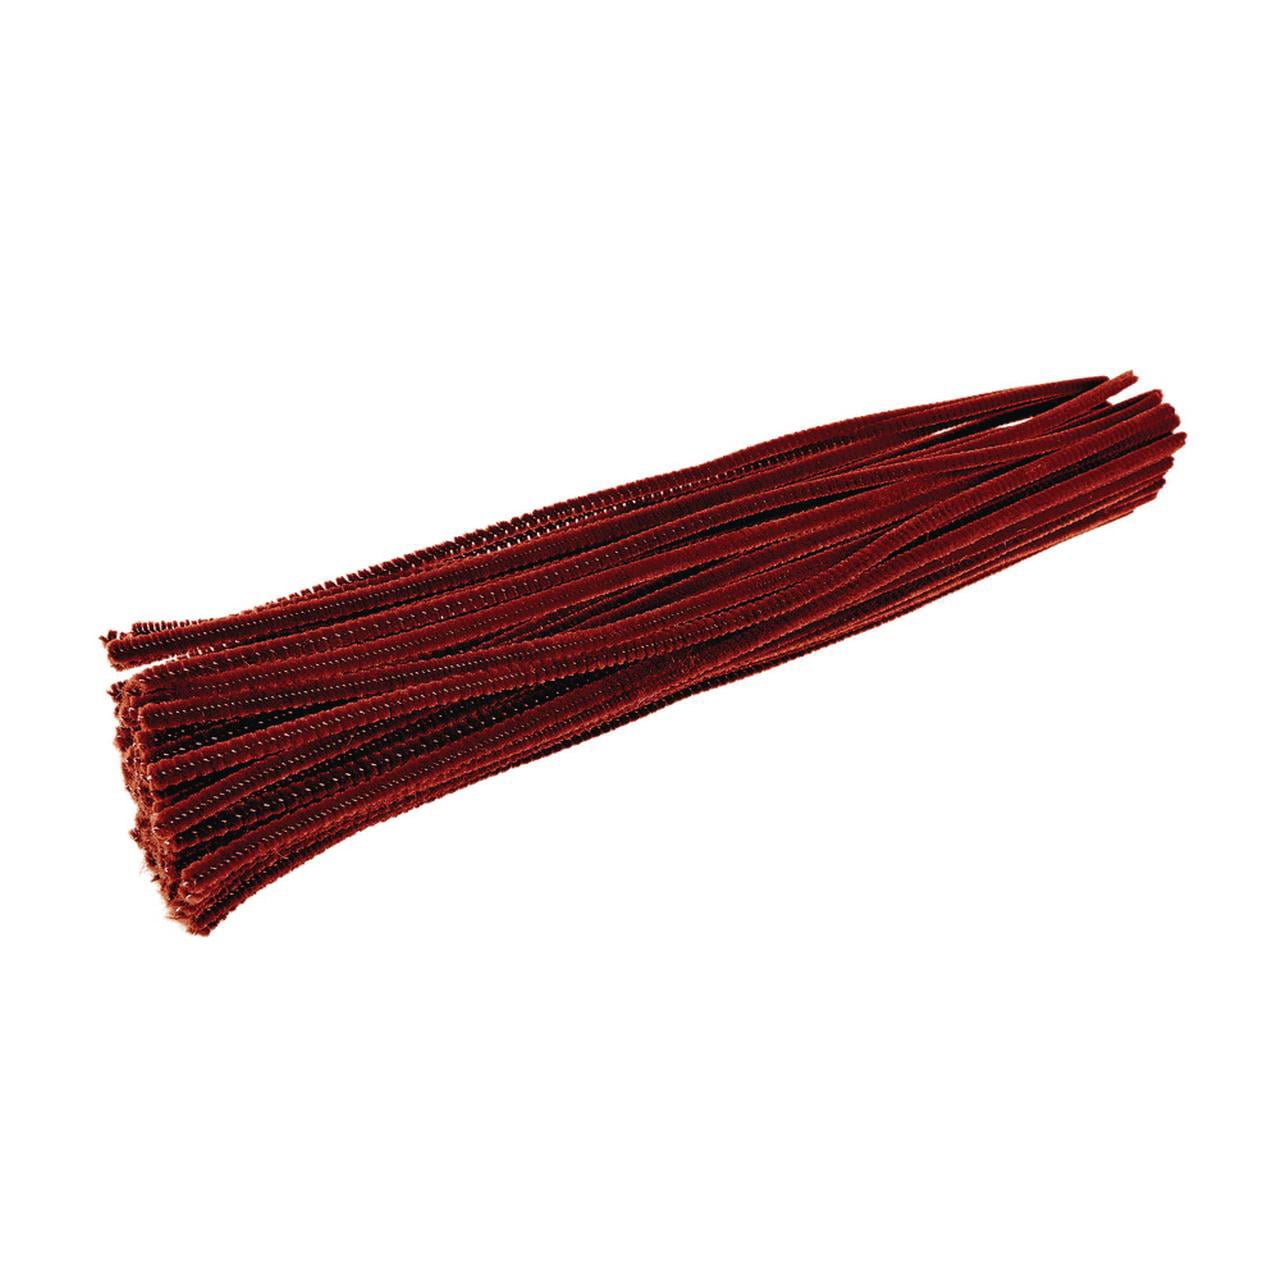 10 pack CHERRY RED chenille craft stems pipe cleaners 30cm long 6mm wide 